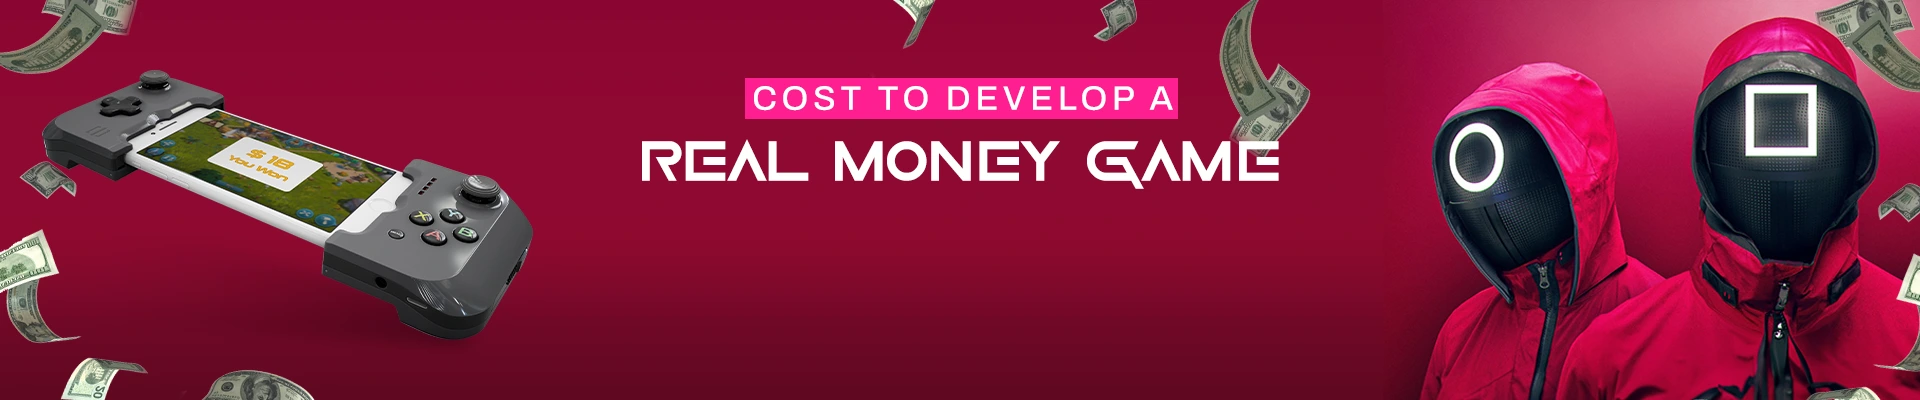 Cost to Develop a Real Money Game